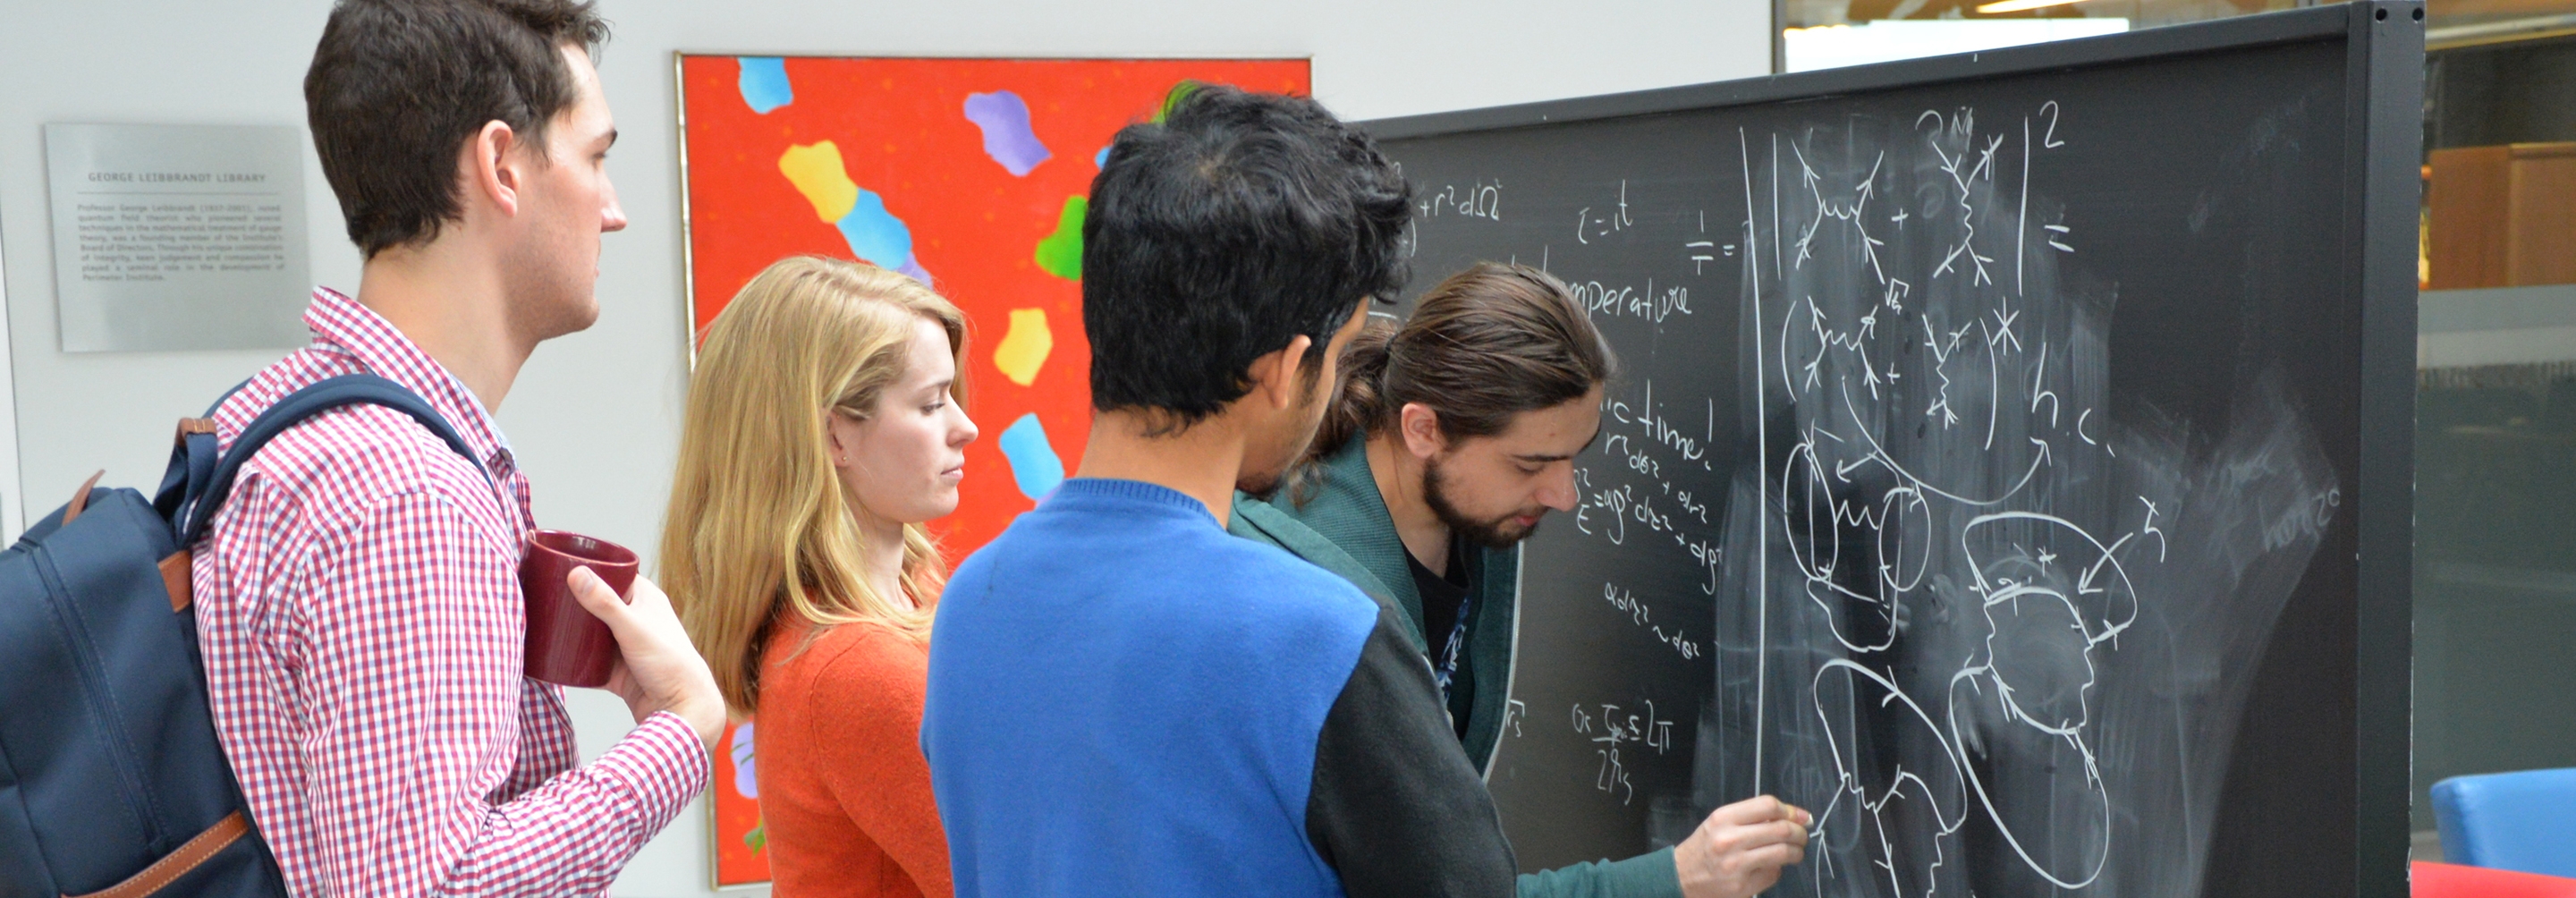 Three men and a woman standing at a chalkboard working on equations